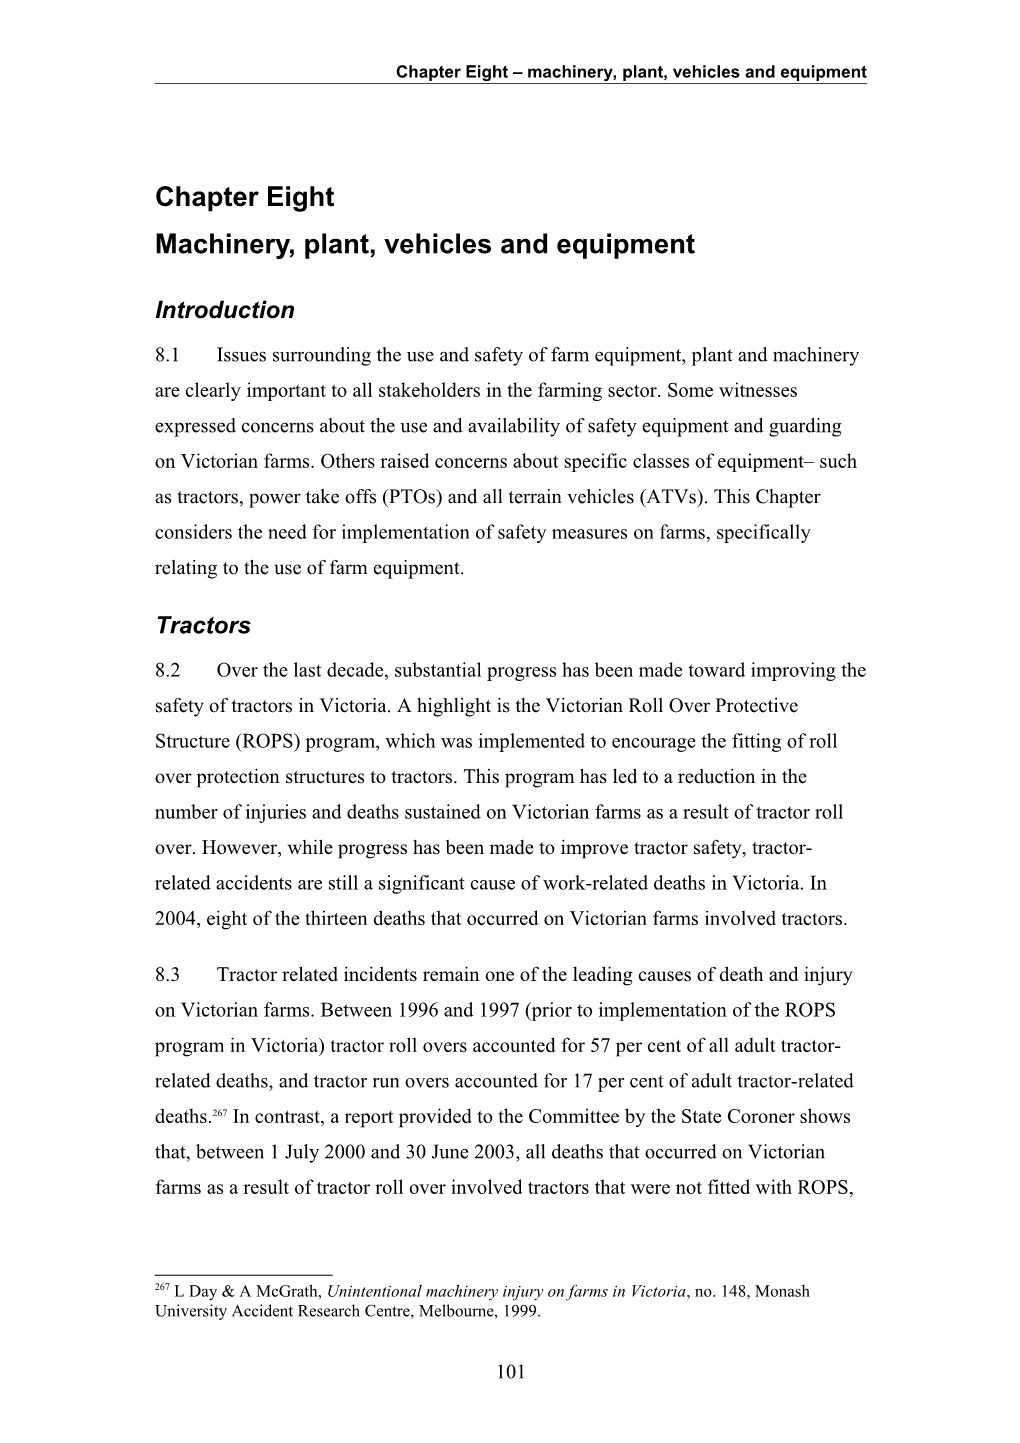 Chapter Eight Machinery, Plant, Vehicles and Equipment